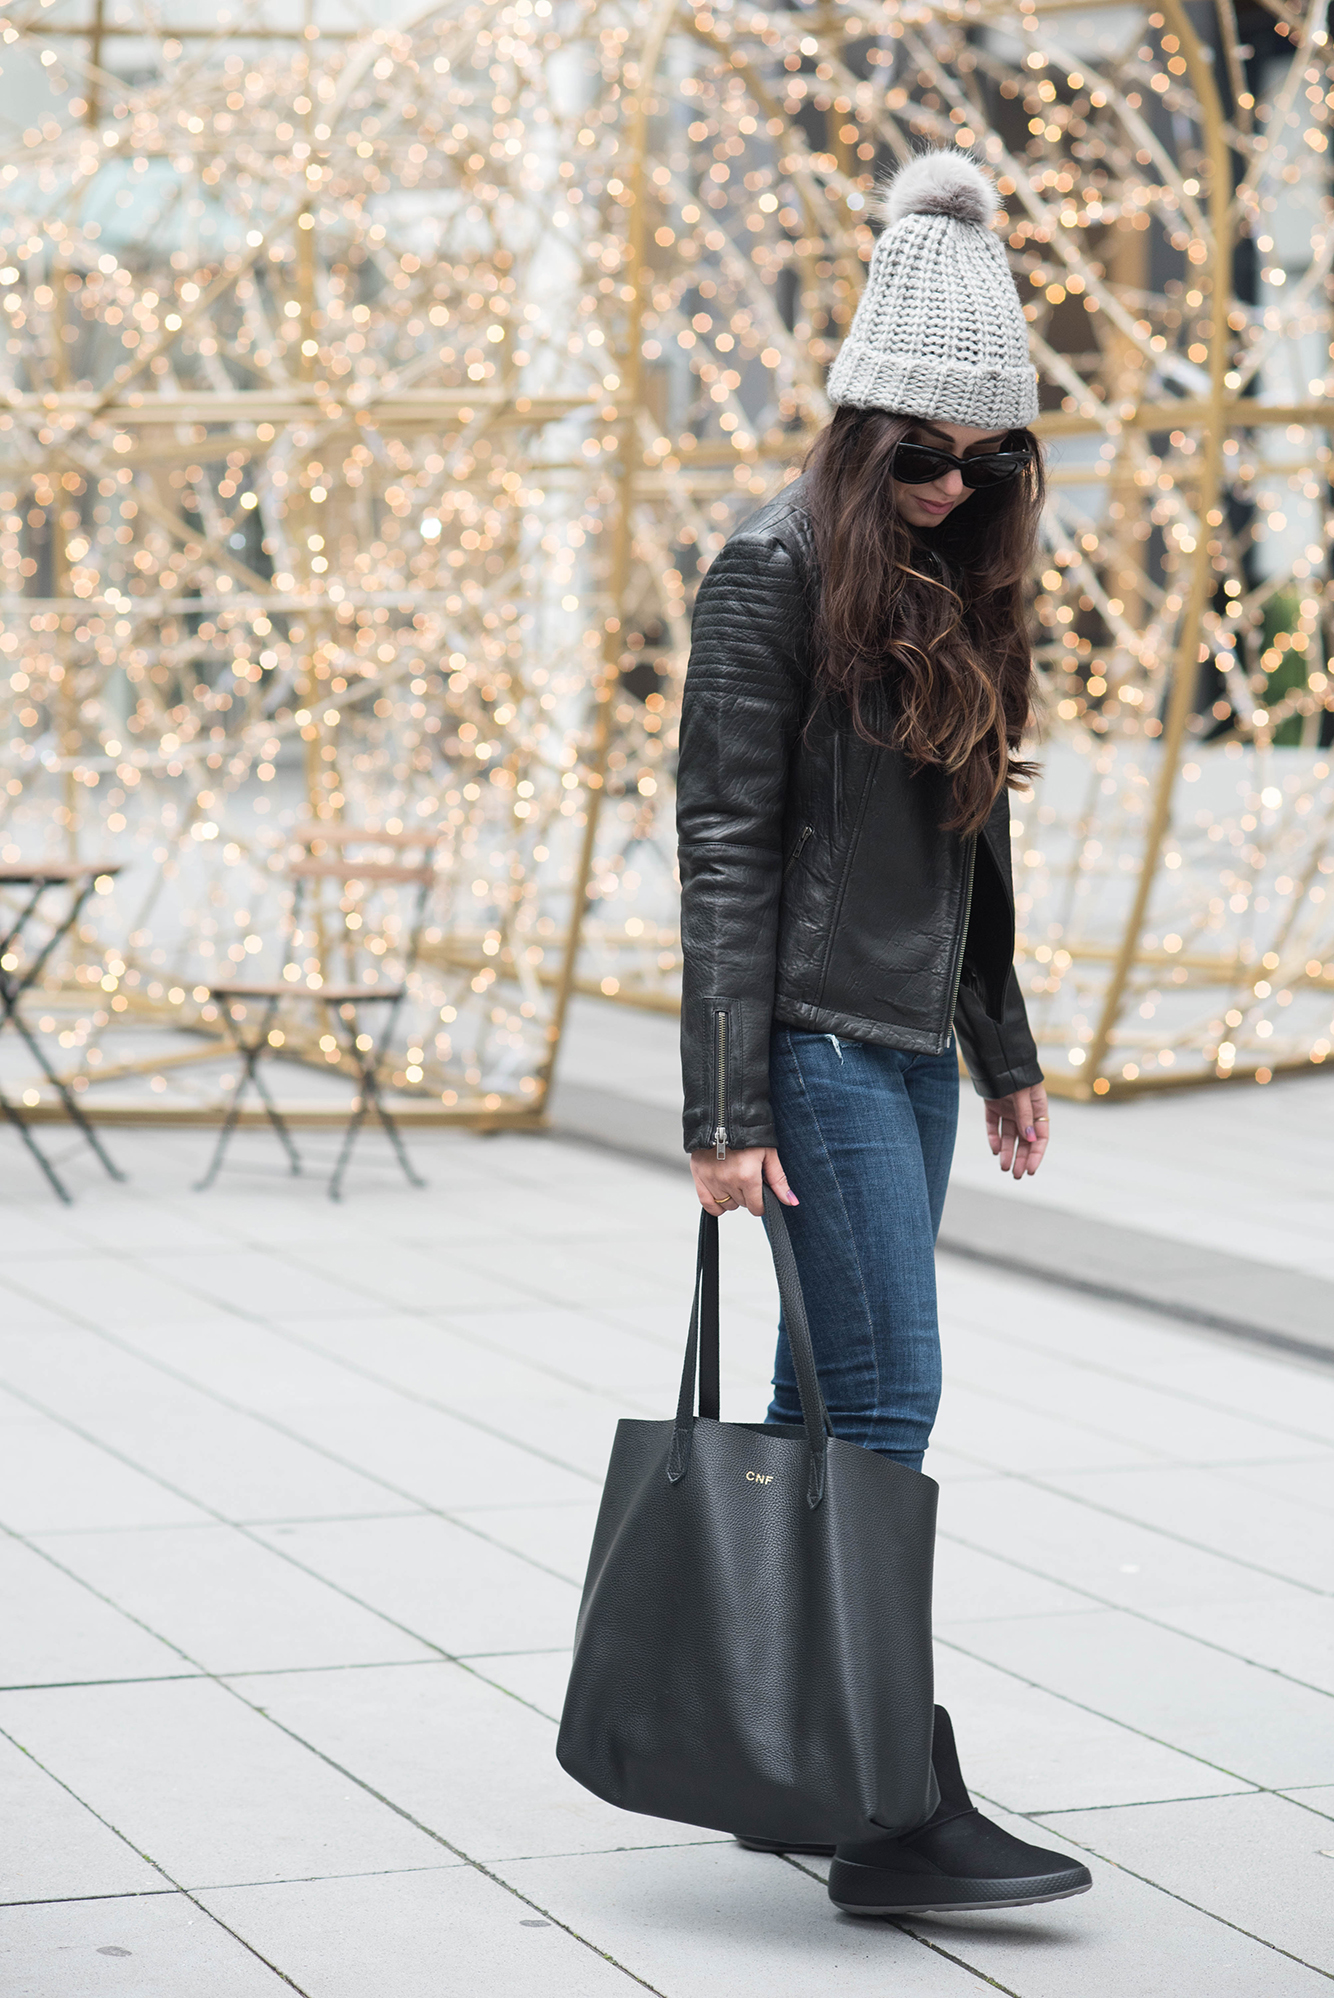 coco-and-vera-top-vancouver-fashion-blog-top-canadian-fashion-blog-top-blogger-street-style-ecco-ukiuk-boots-yoga-jeans-denim-cupcakes-and-cashmere-jacket-hm-toque-cuyana-tote